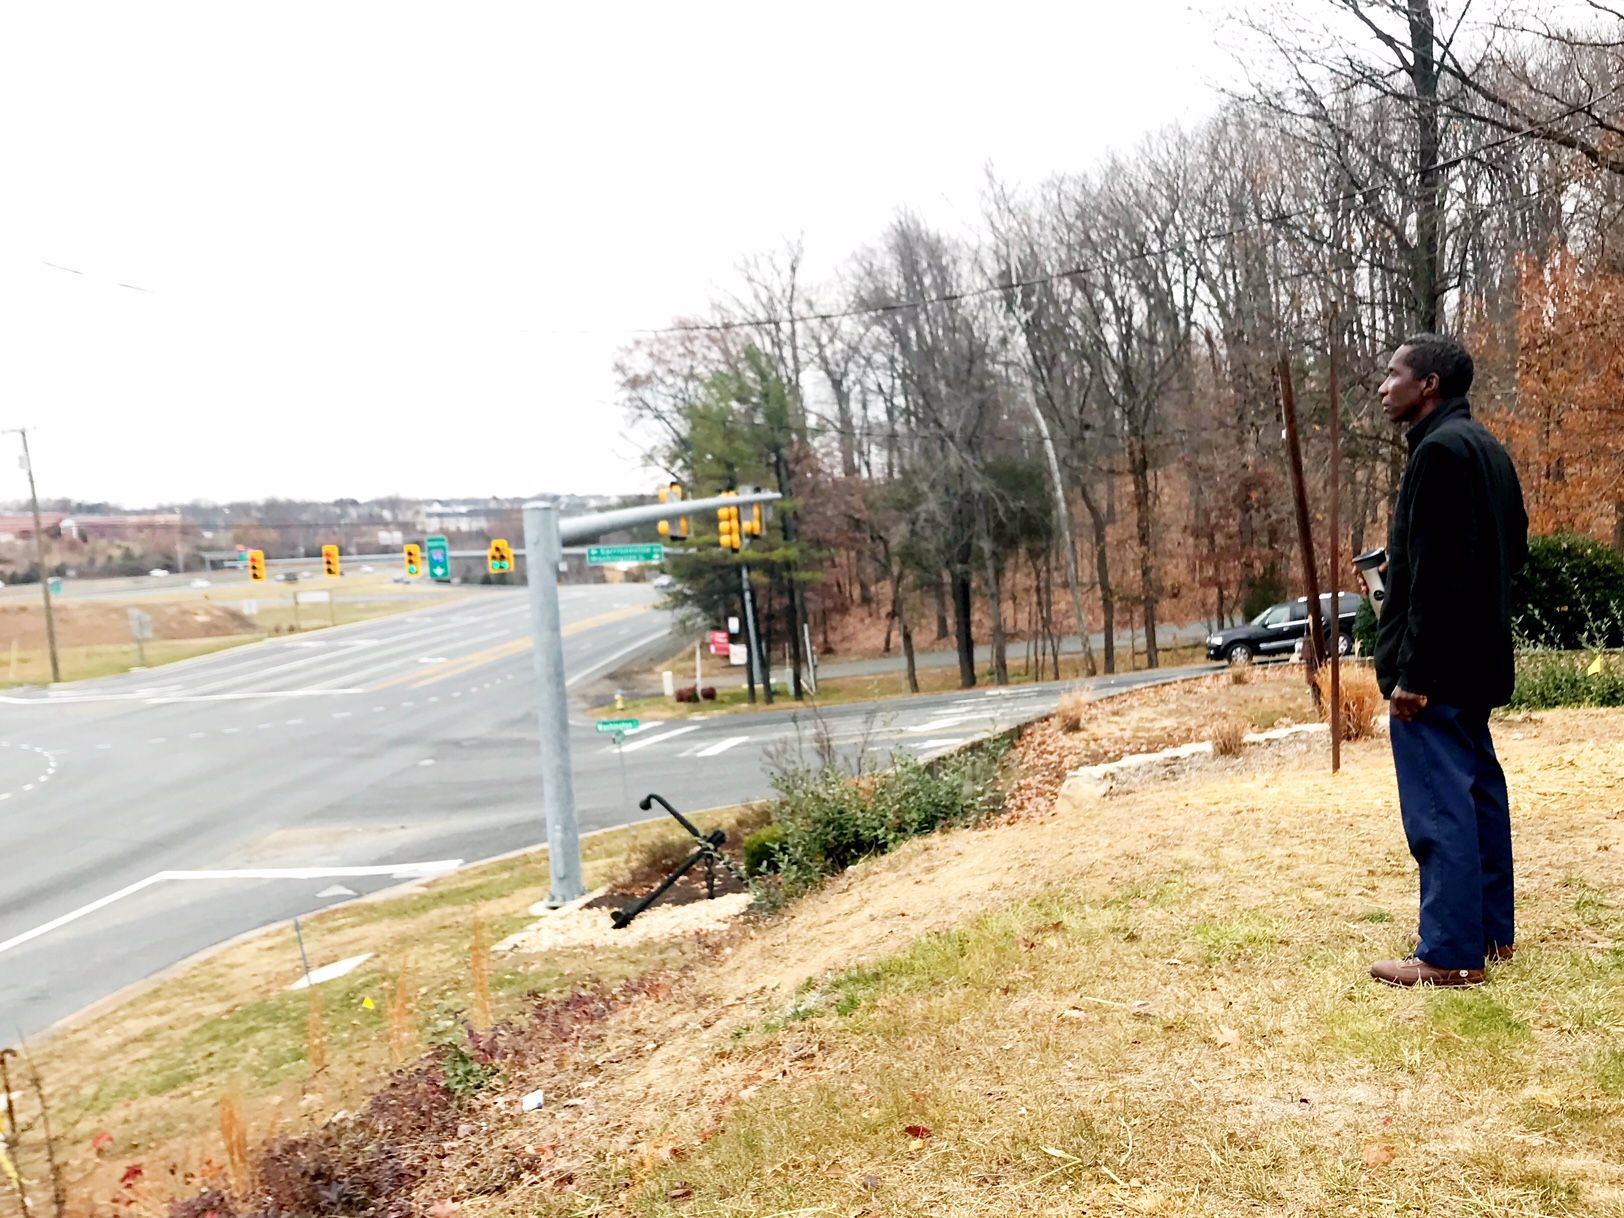 In Dec. 2017, Derrick Butler watched as D.C. police searched near I-95 in Stafford County for the remains of his sister, Pamela, who was murdered in 2009. (WTOP/Neal Augenstein)